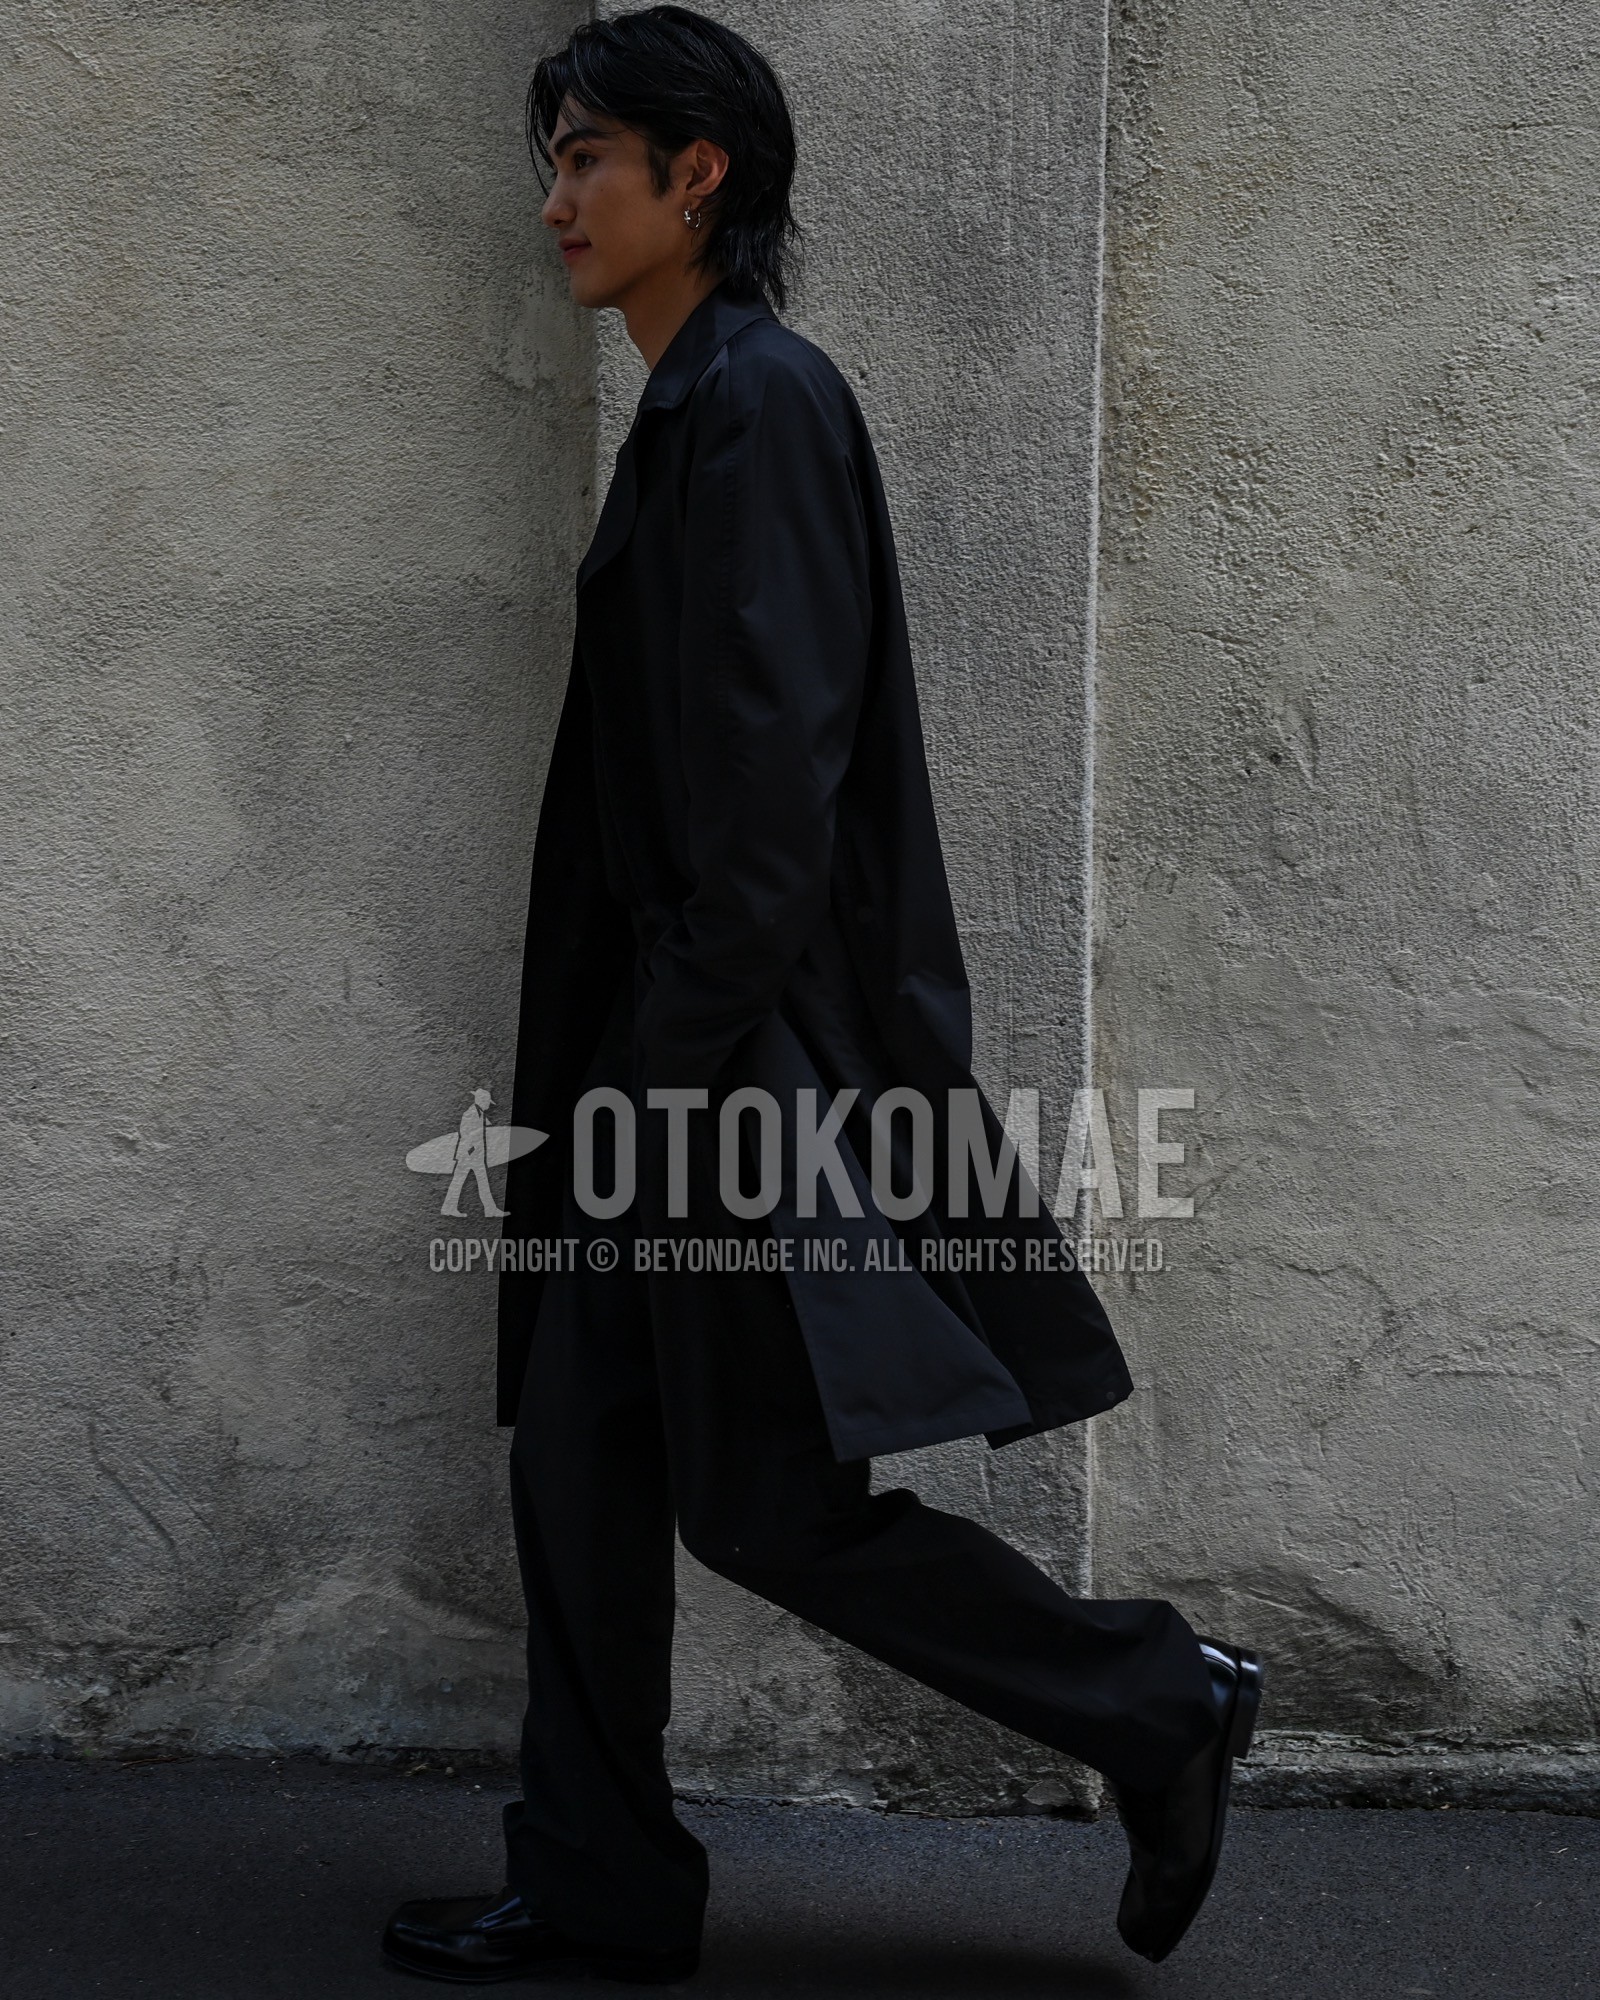 Men's spring autumn outfit with black plain stenkarrer coat, black plain skinny pants, black coin loafers leather shoes.